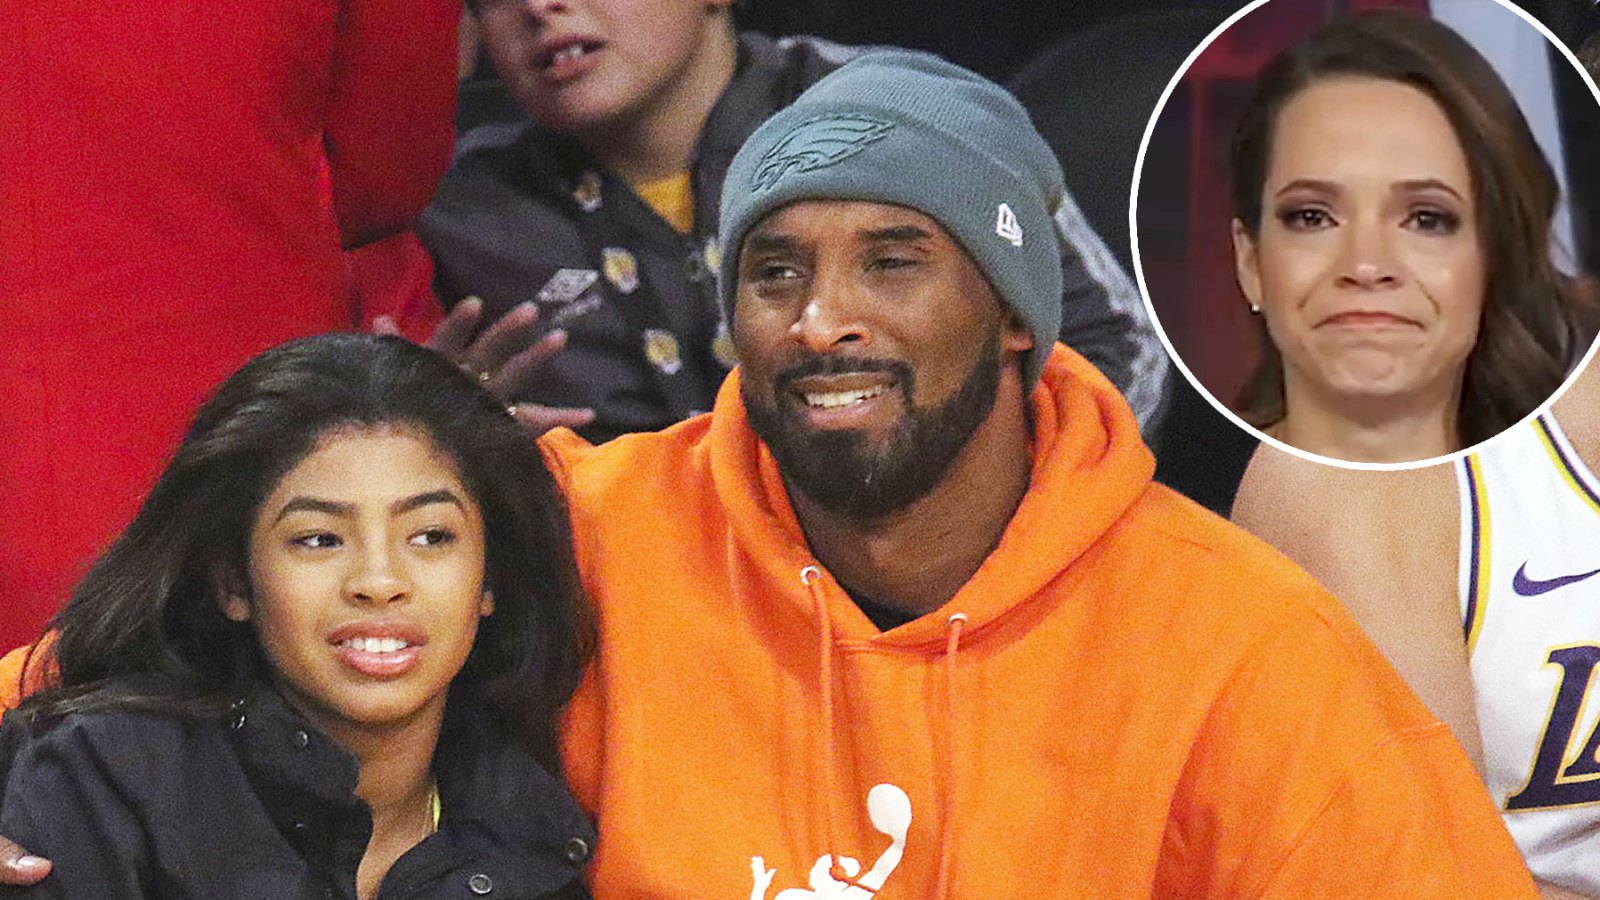 ESPN Host Elle Duncan Heartwarming Story About Kobe Bryant and His Daughters Goes Viral